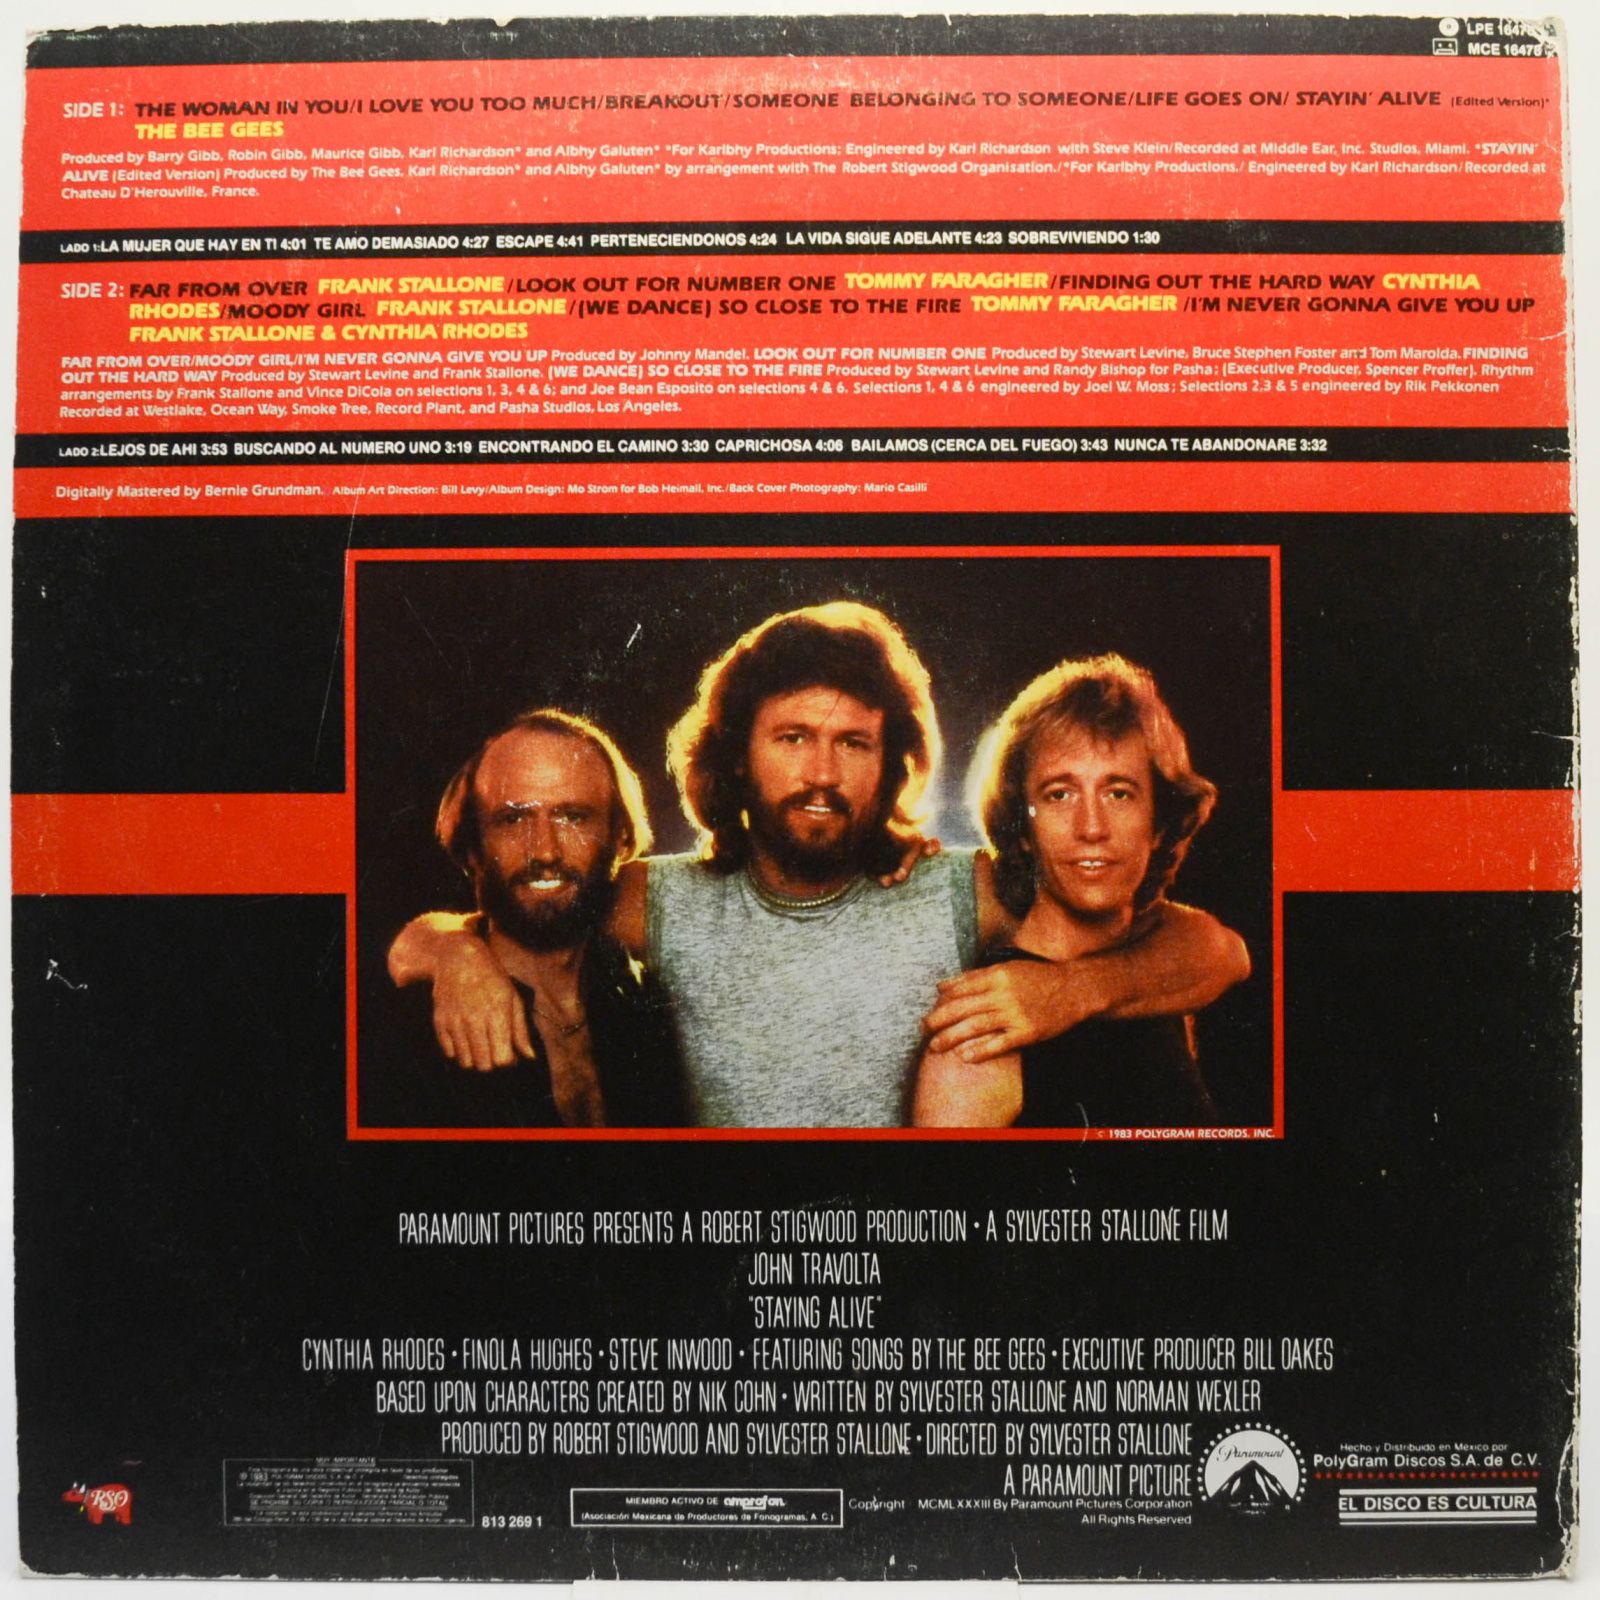 Various — The Original Motion Picture Soundtrack - Staying Alive, 1983